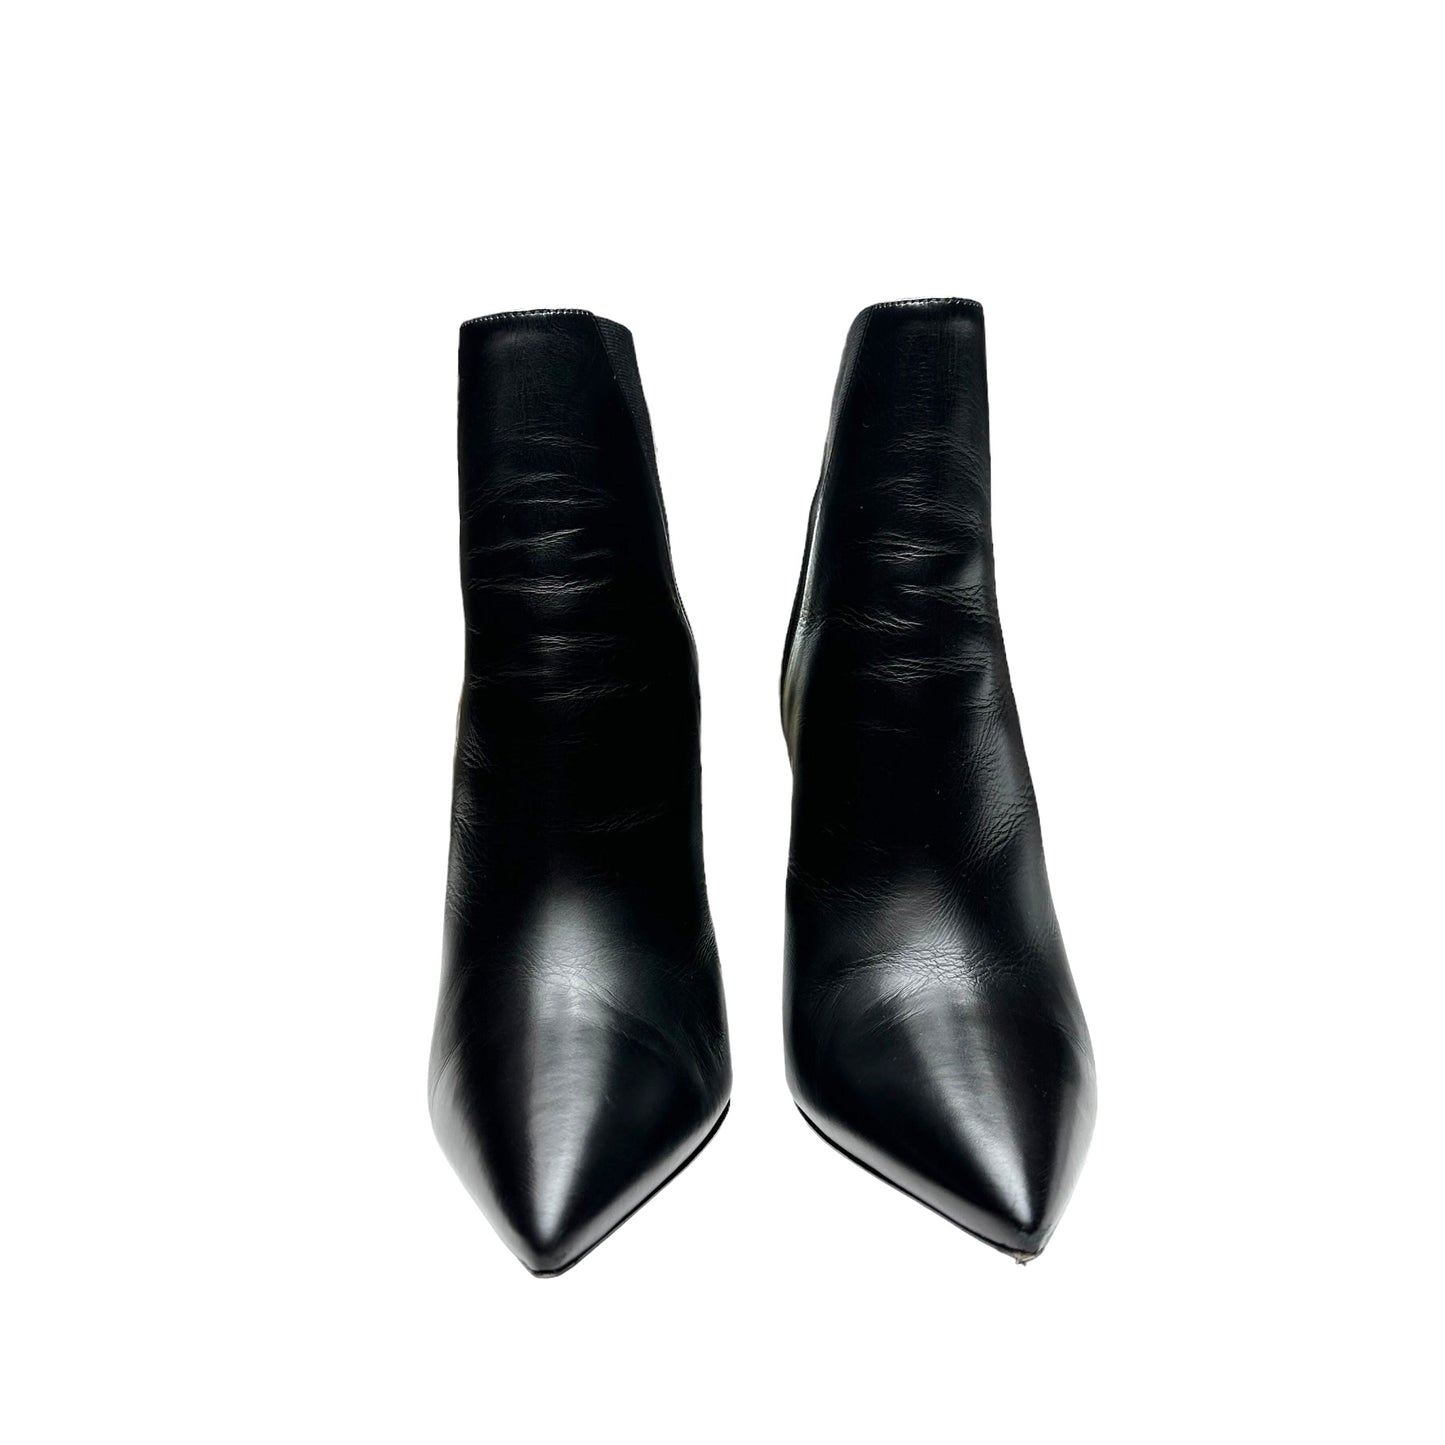 Black Leather Heeled Boots - 9